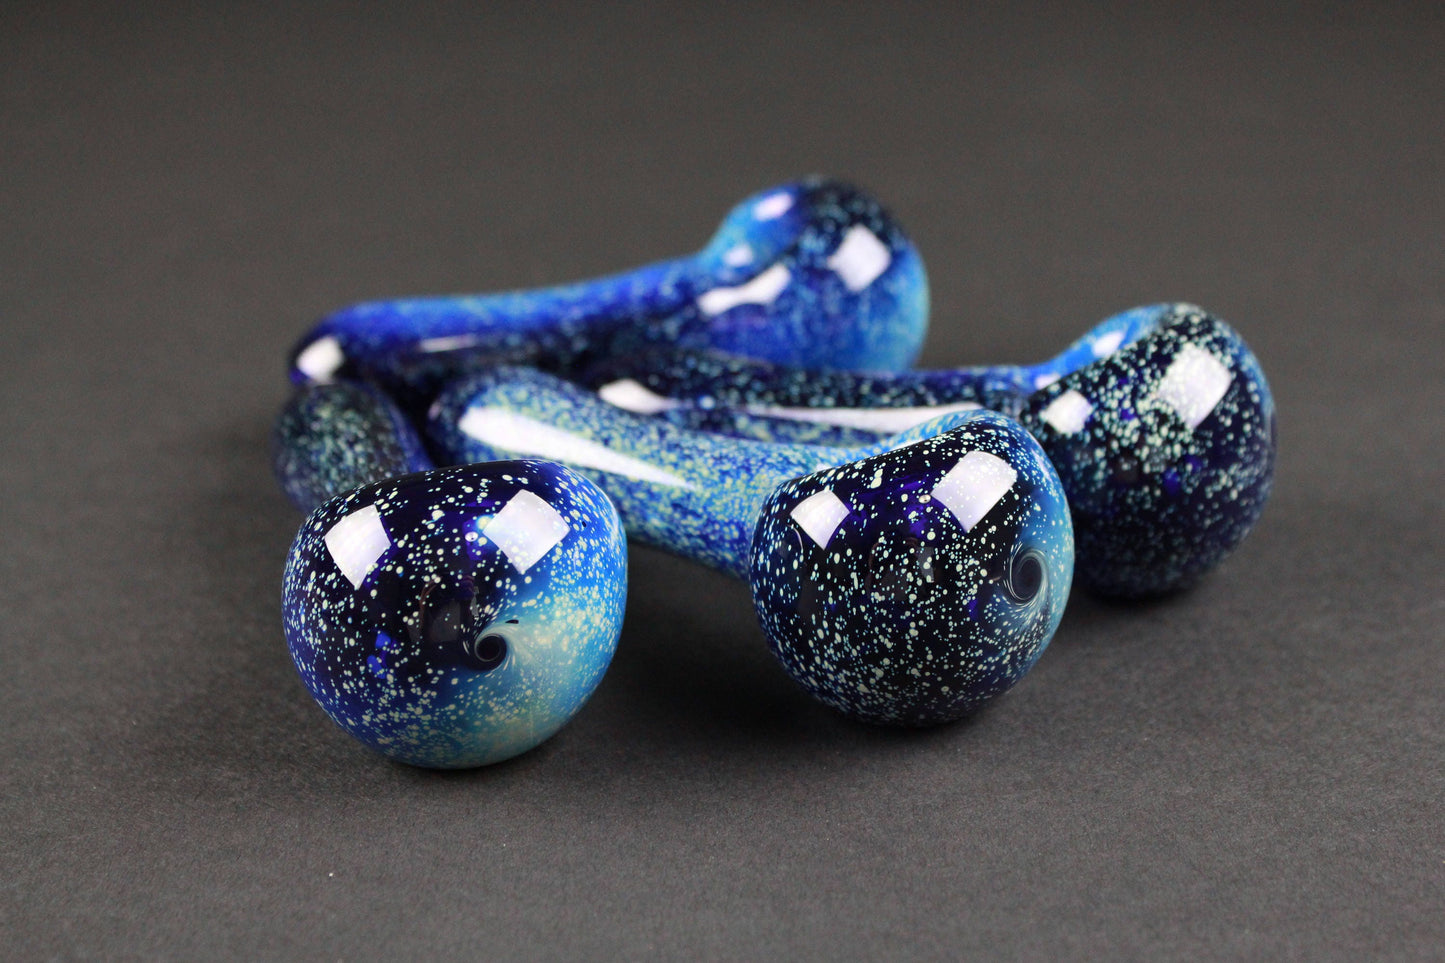 Pipes Cobalt and Neon Lace Glass Pipe For Smoking Weed